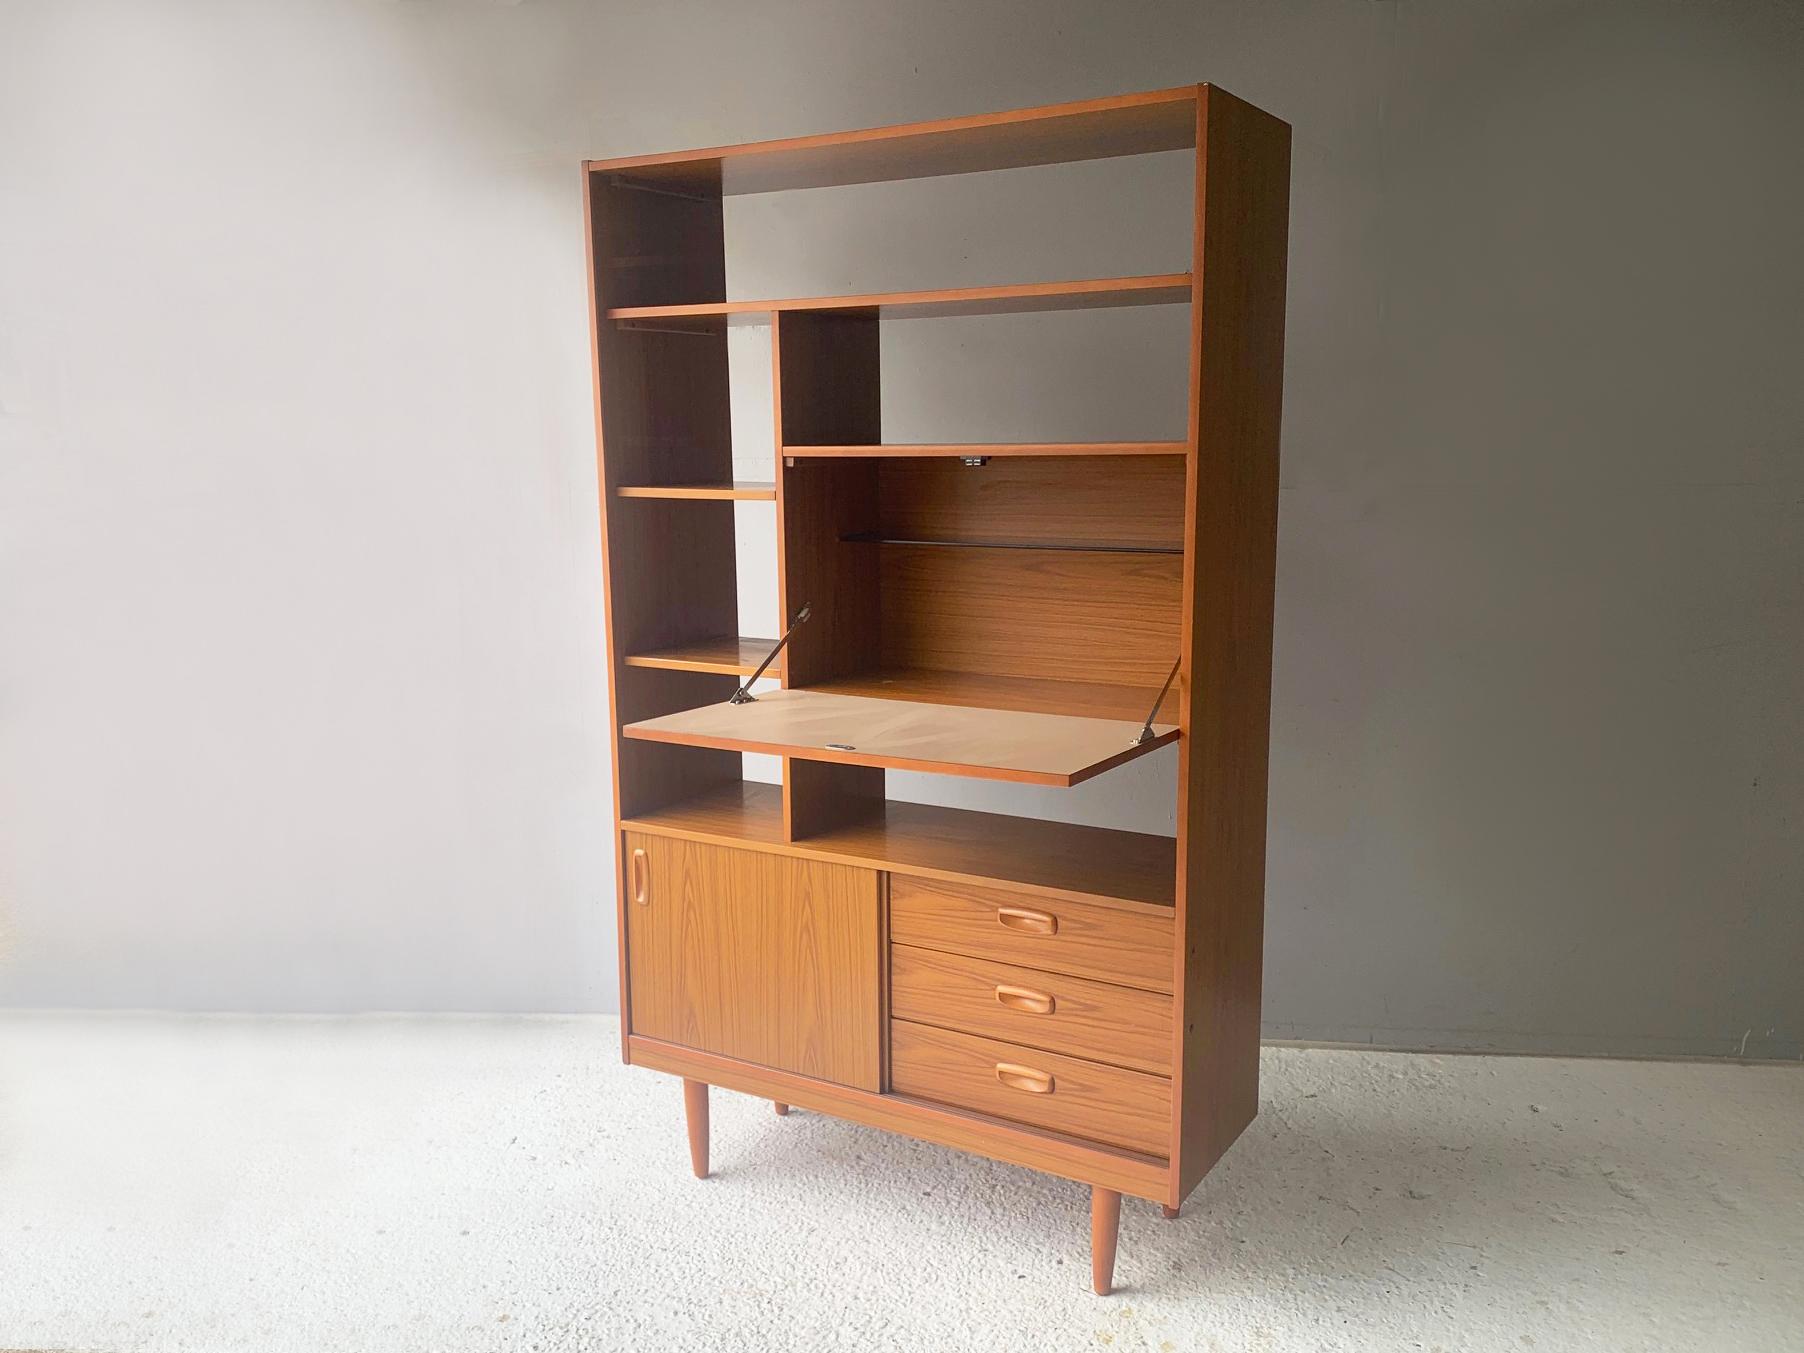 Founded in 1957 by Chaim Schreiber, Schreiber furniture is an interesting British success story. 

The Company was one of the biggest names in furniture in the 70s, rivalling G Plan E Gomme and other famous names.

In 1973 they added fitted kitchen